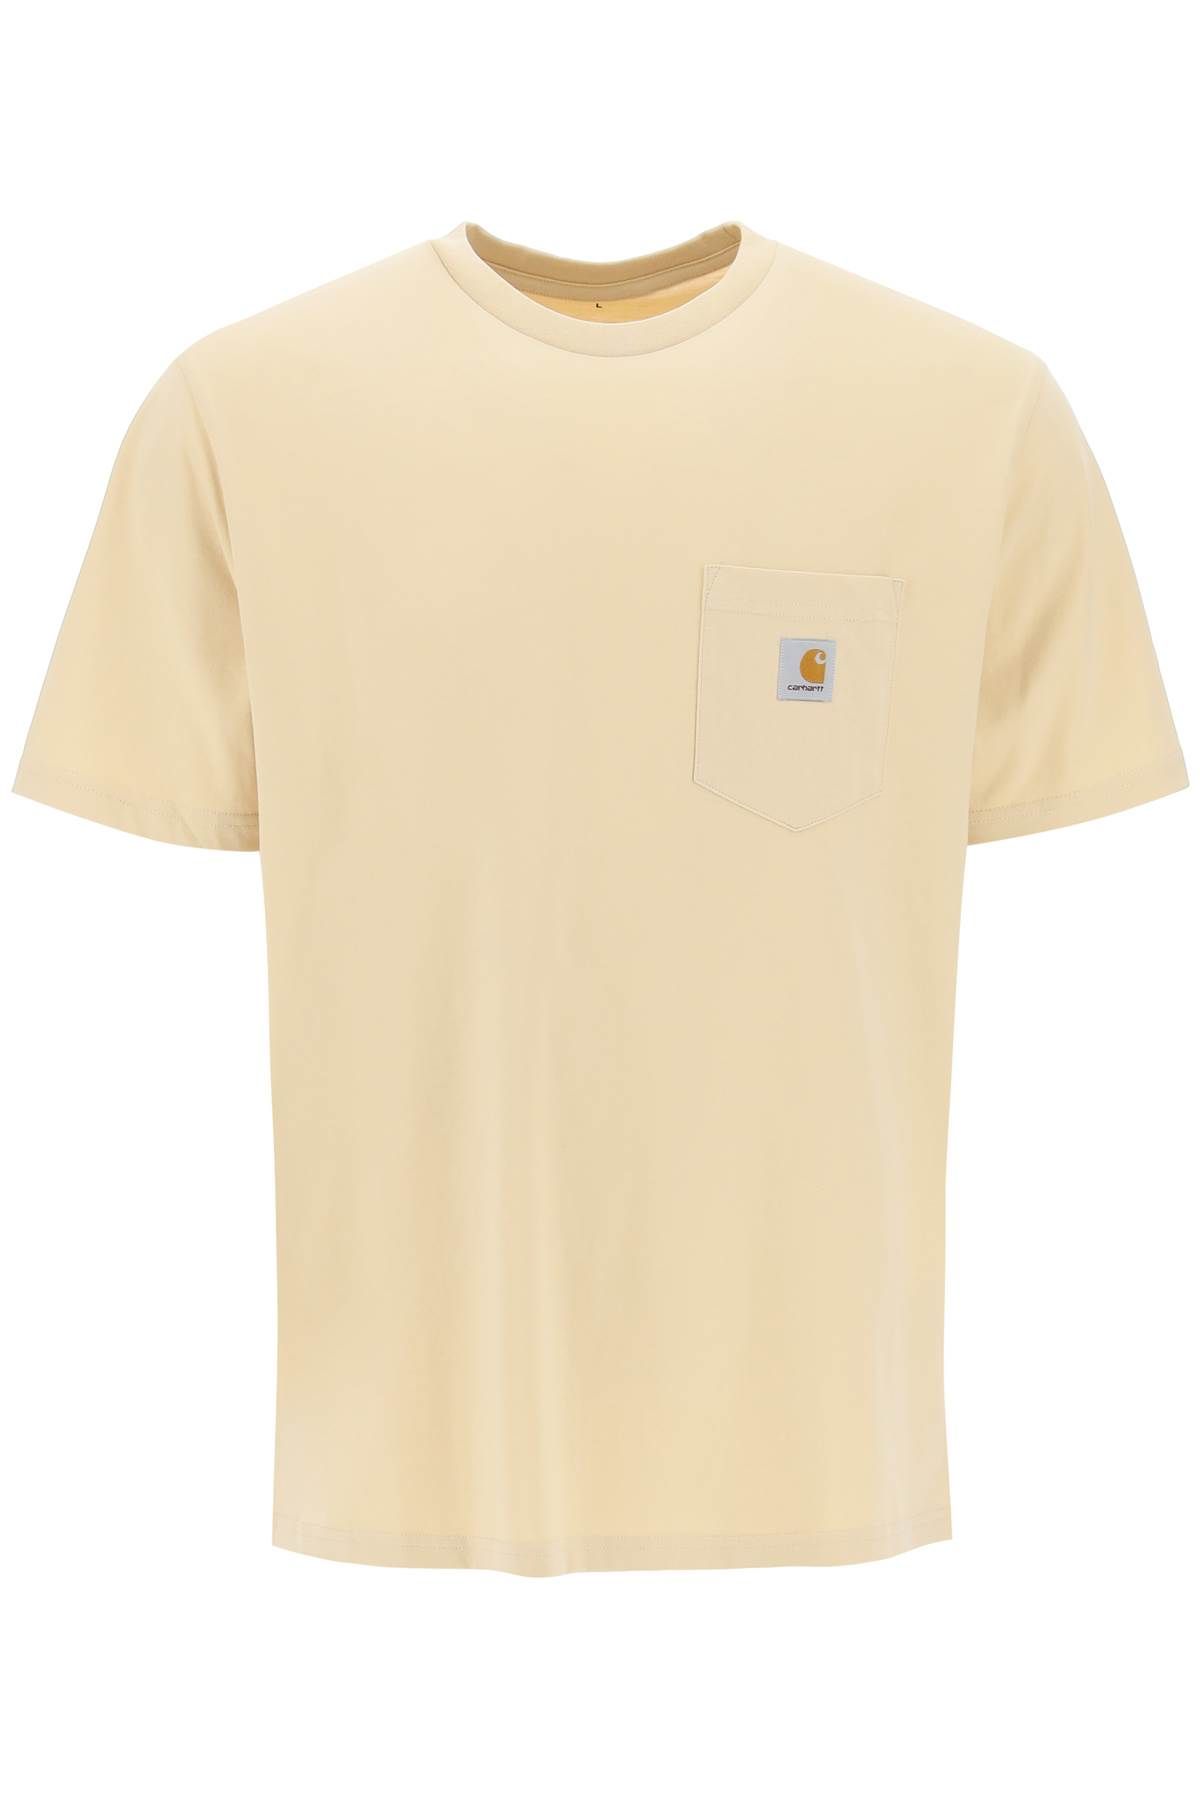 Carhartt WIP CARHARTT WIP t-shirt with chest pocket